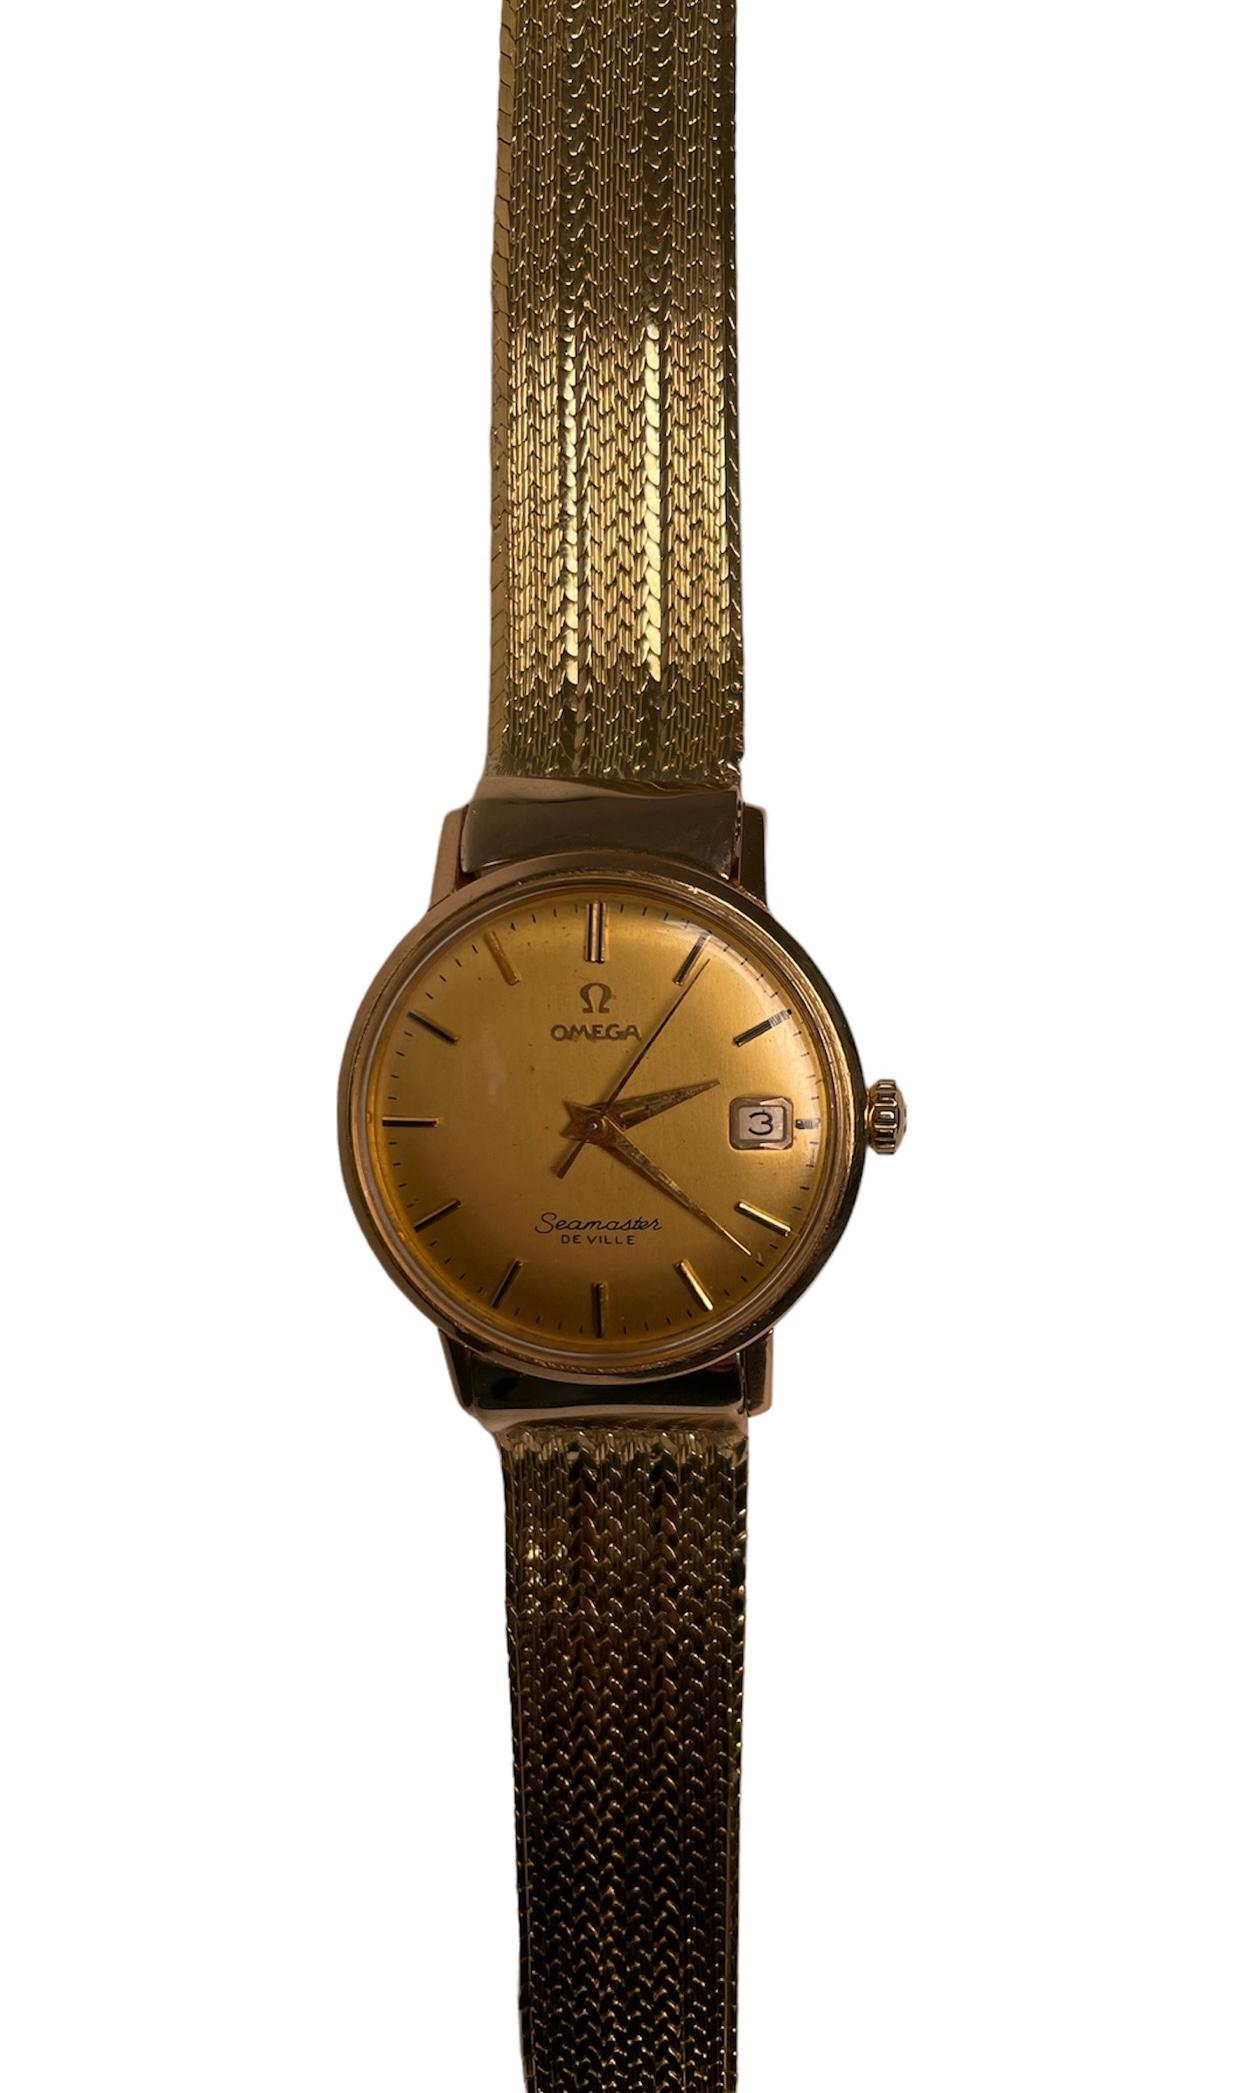 18k Yellow Gold Omega Seamaster De Ville Men Watch In Good Condition For Sale In Guaynabo, PR